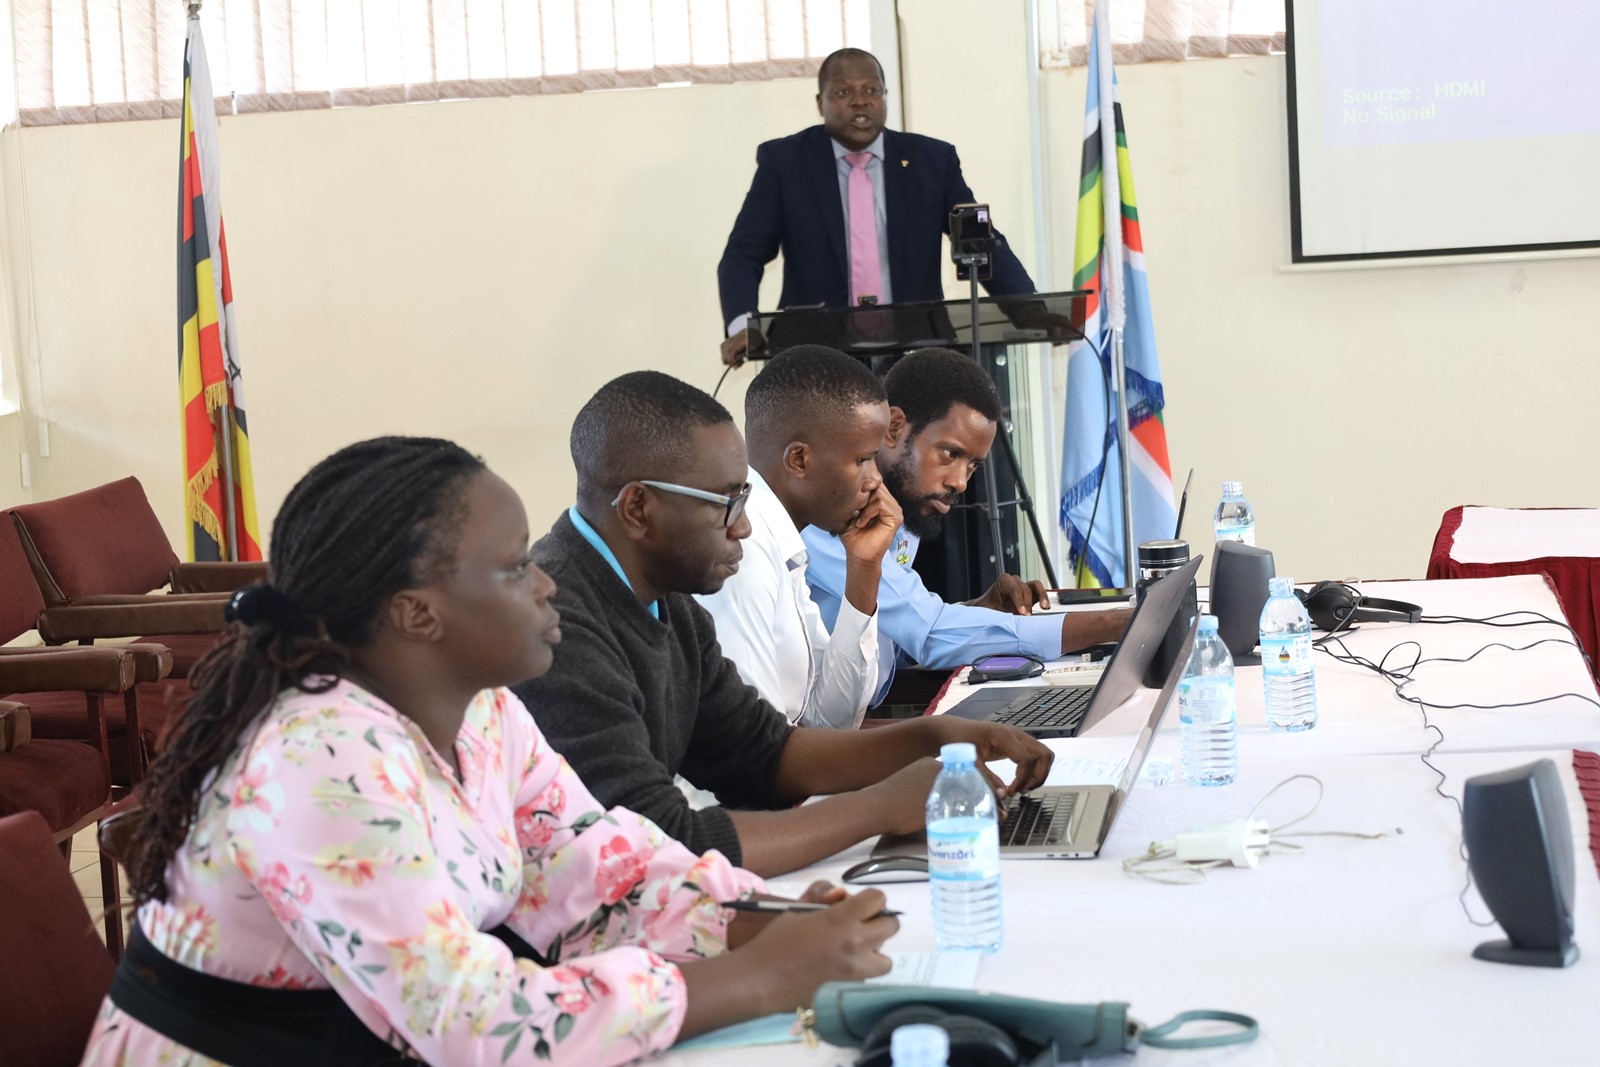 The Principal Prof. Tonny Oyana (Standing) addresses participants attending the training on Accountability Protocols held on 23rd November 2023 at CoCIS. Accountability Protocols Training, 23rd November 2023, Conference Room, Level 4, Block A, CoCIS, Makerere University, Kampala Uganda, East Africa.